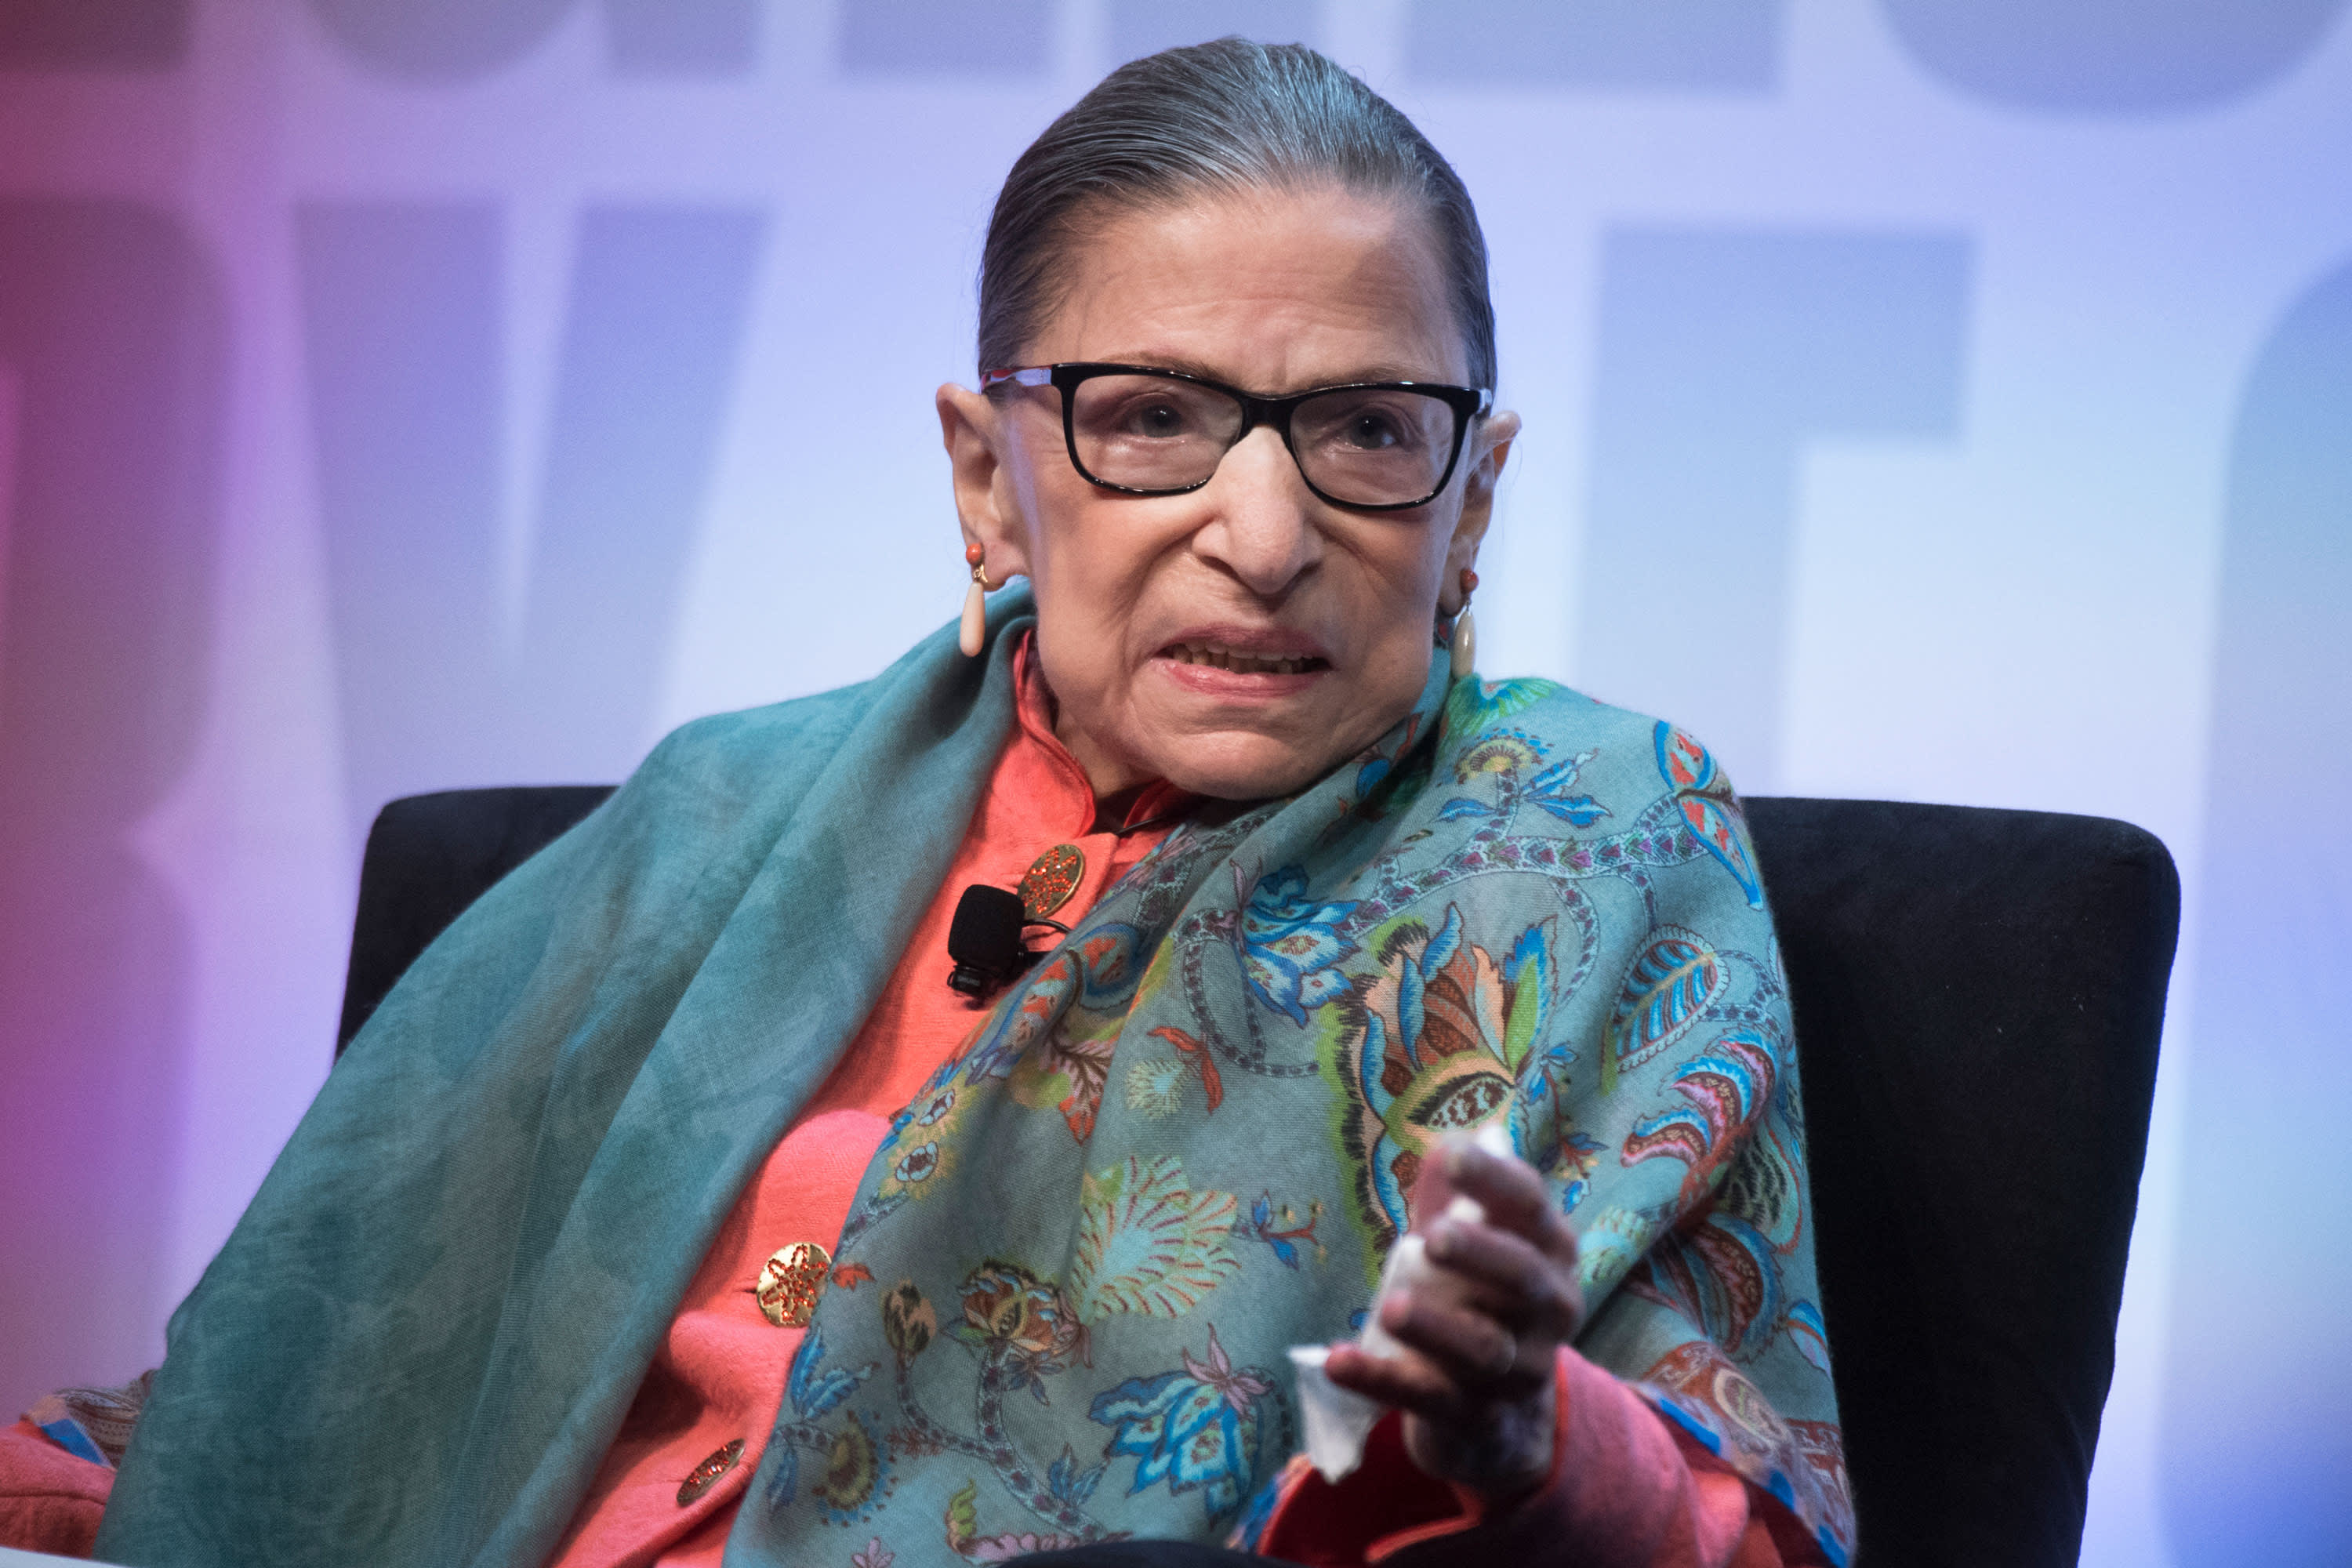 'Beyond our wildest dreams': Ruth Bader Ginsburg book nets $100,000 in blockbuster auction of late Supreme Court justice's library